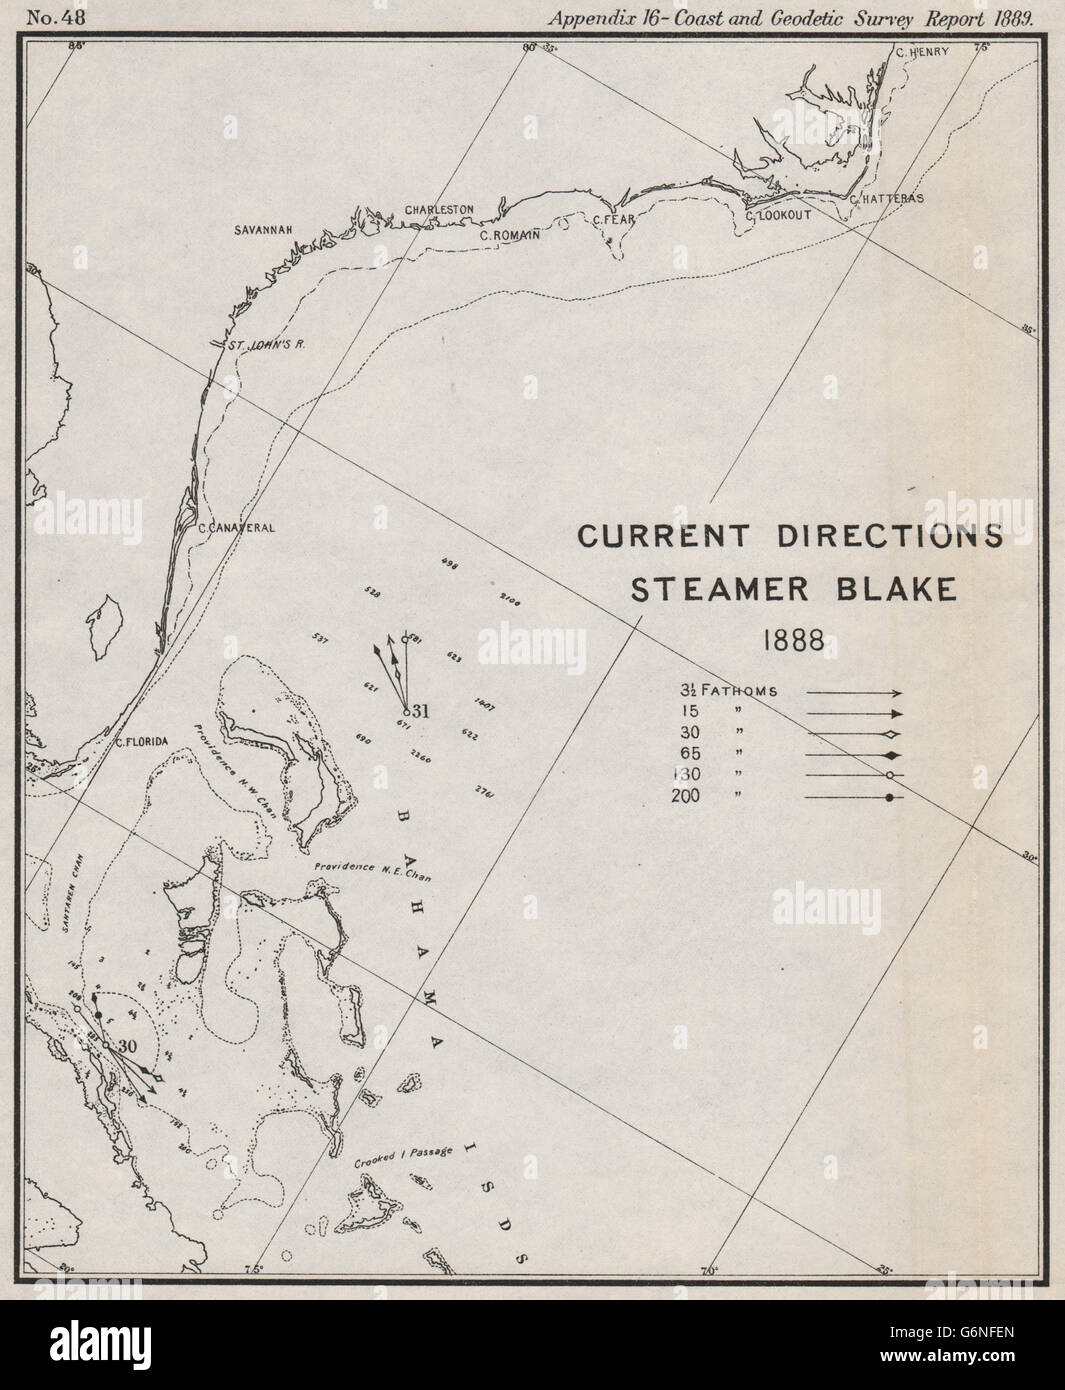 USA BAHAMAS: Ocean current directions 1888. Gulf Stream. USCGS, 1889 old map Stock Photo